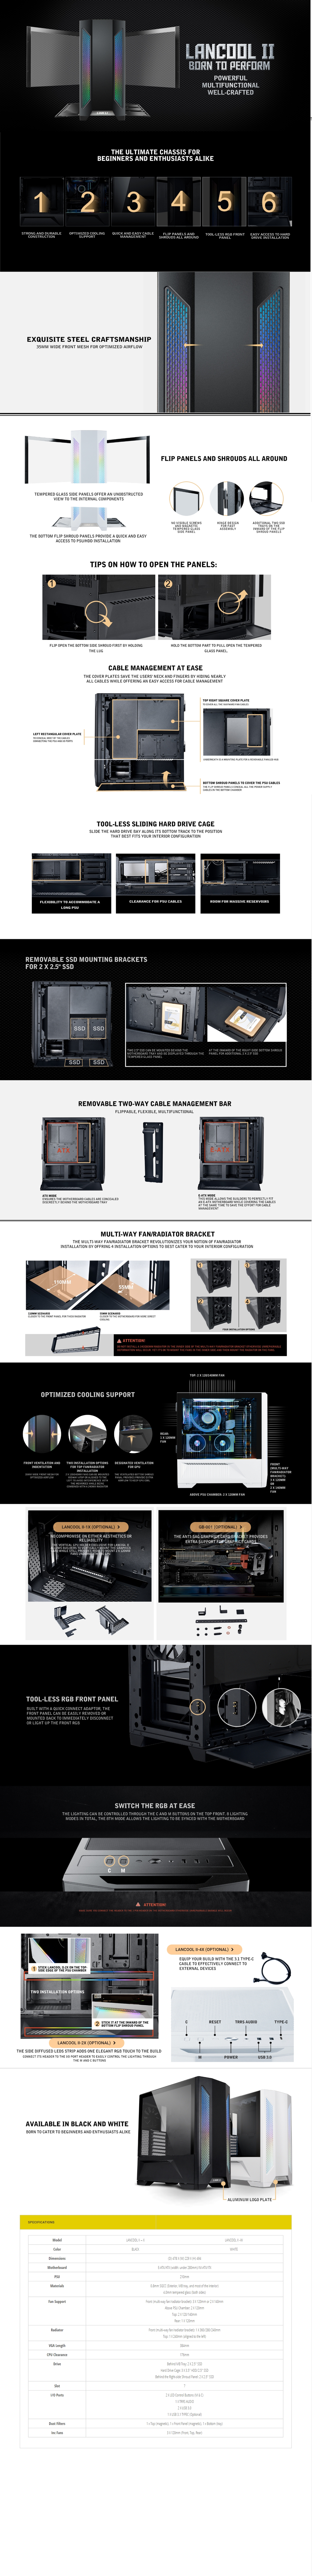 A large marketing image providing additional information about the product Lian-Li LANCOOL II Black Mid Tower Case w/Tempered Glass Side Panel - Additional alt info not provided